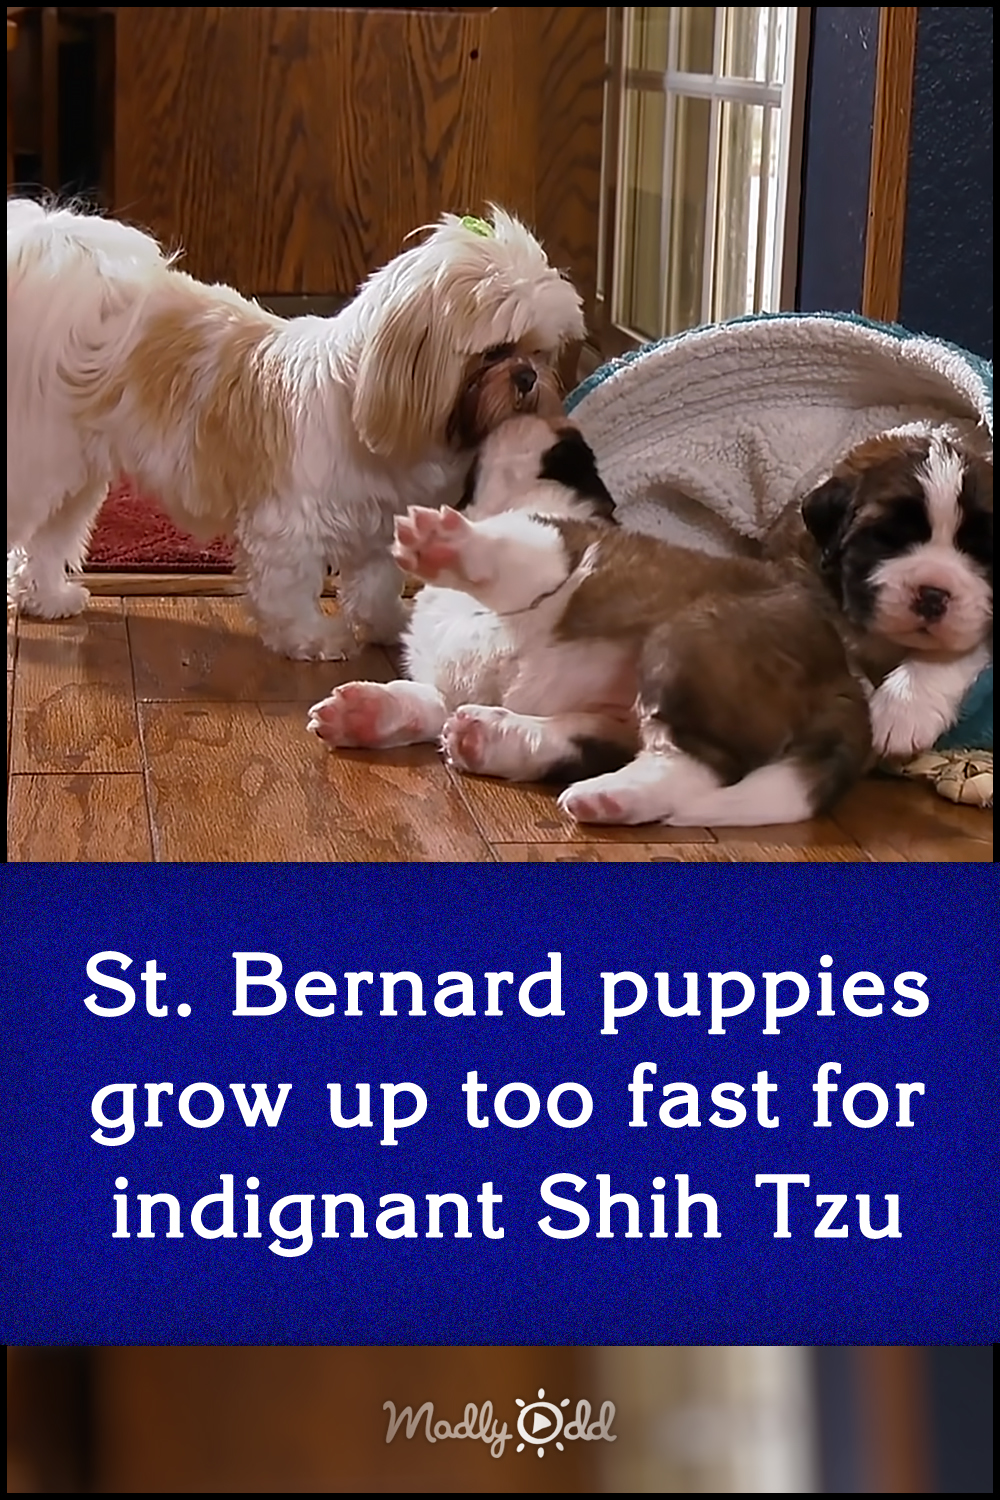 St. Bernard puppies grow up too fast for indignant Shih Tzu